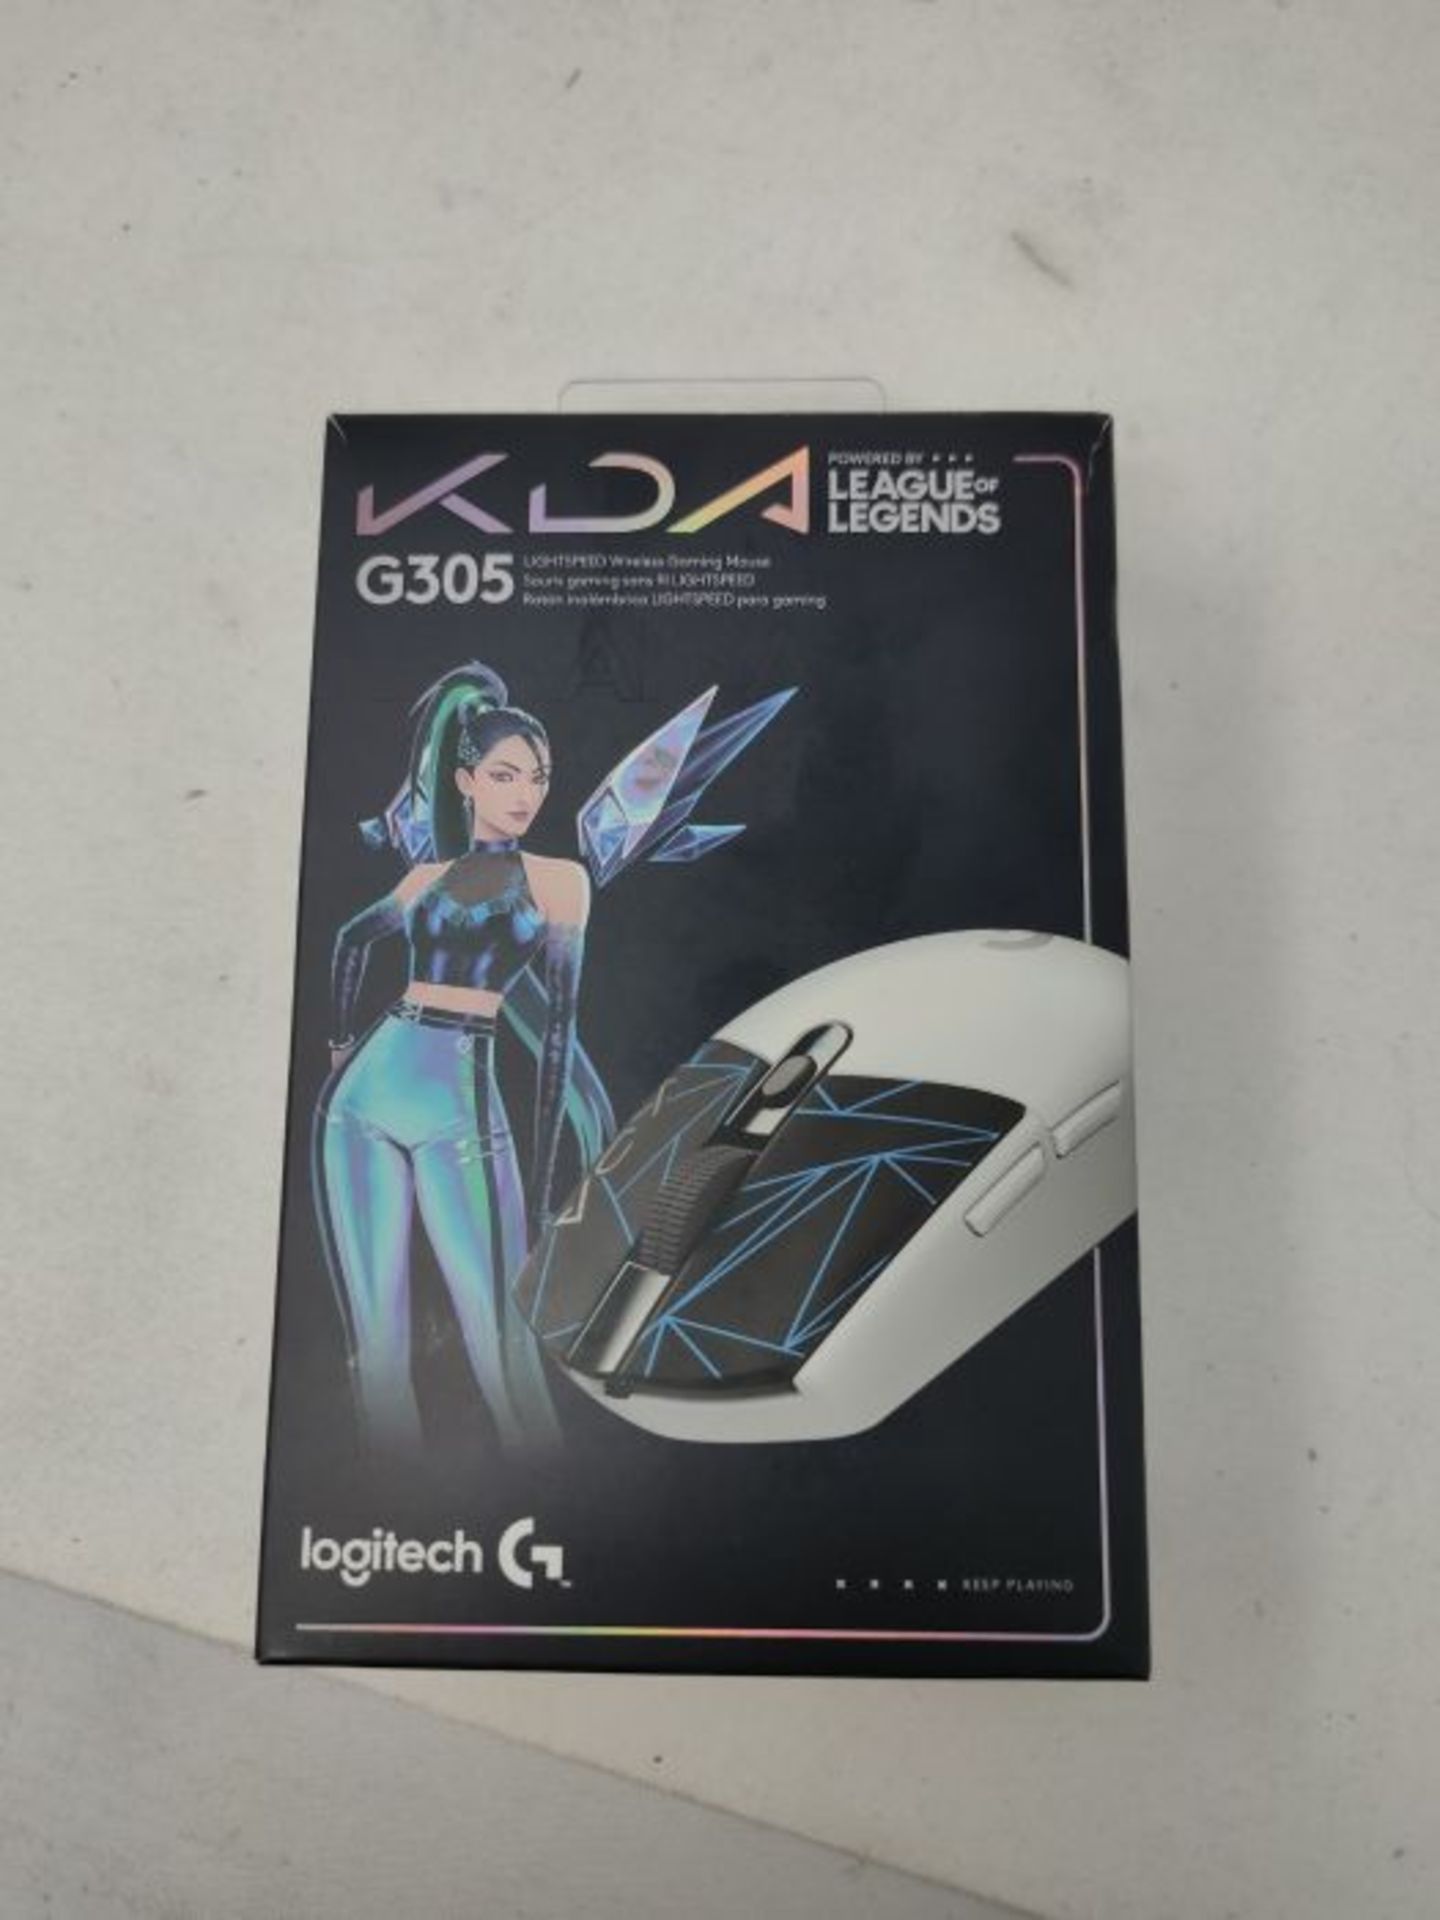 RRP £59.00 Logitech G305 K/DA LIGHTSPEED Wireless Gaming Mouse, Official League of Legends Gaming - Image 2 of 3